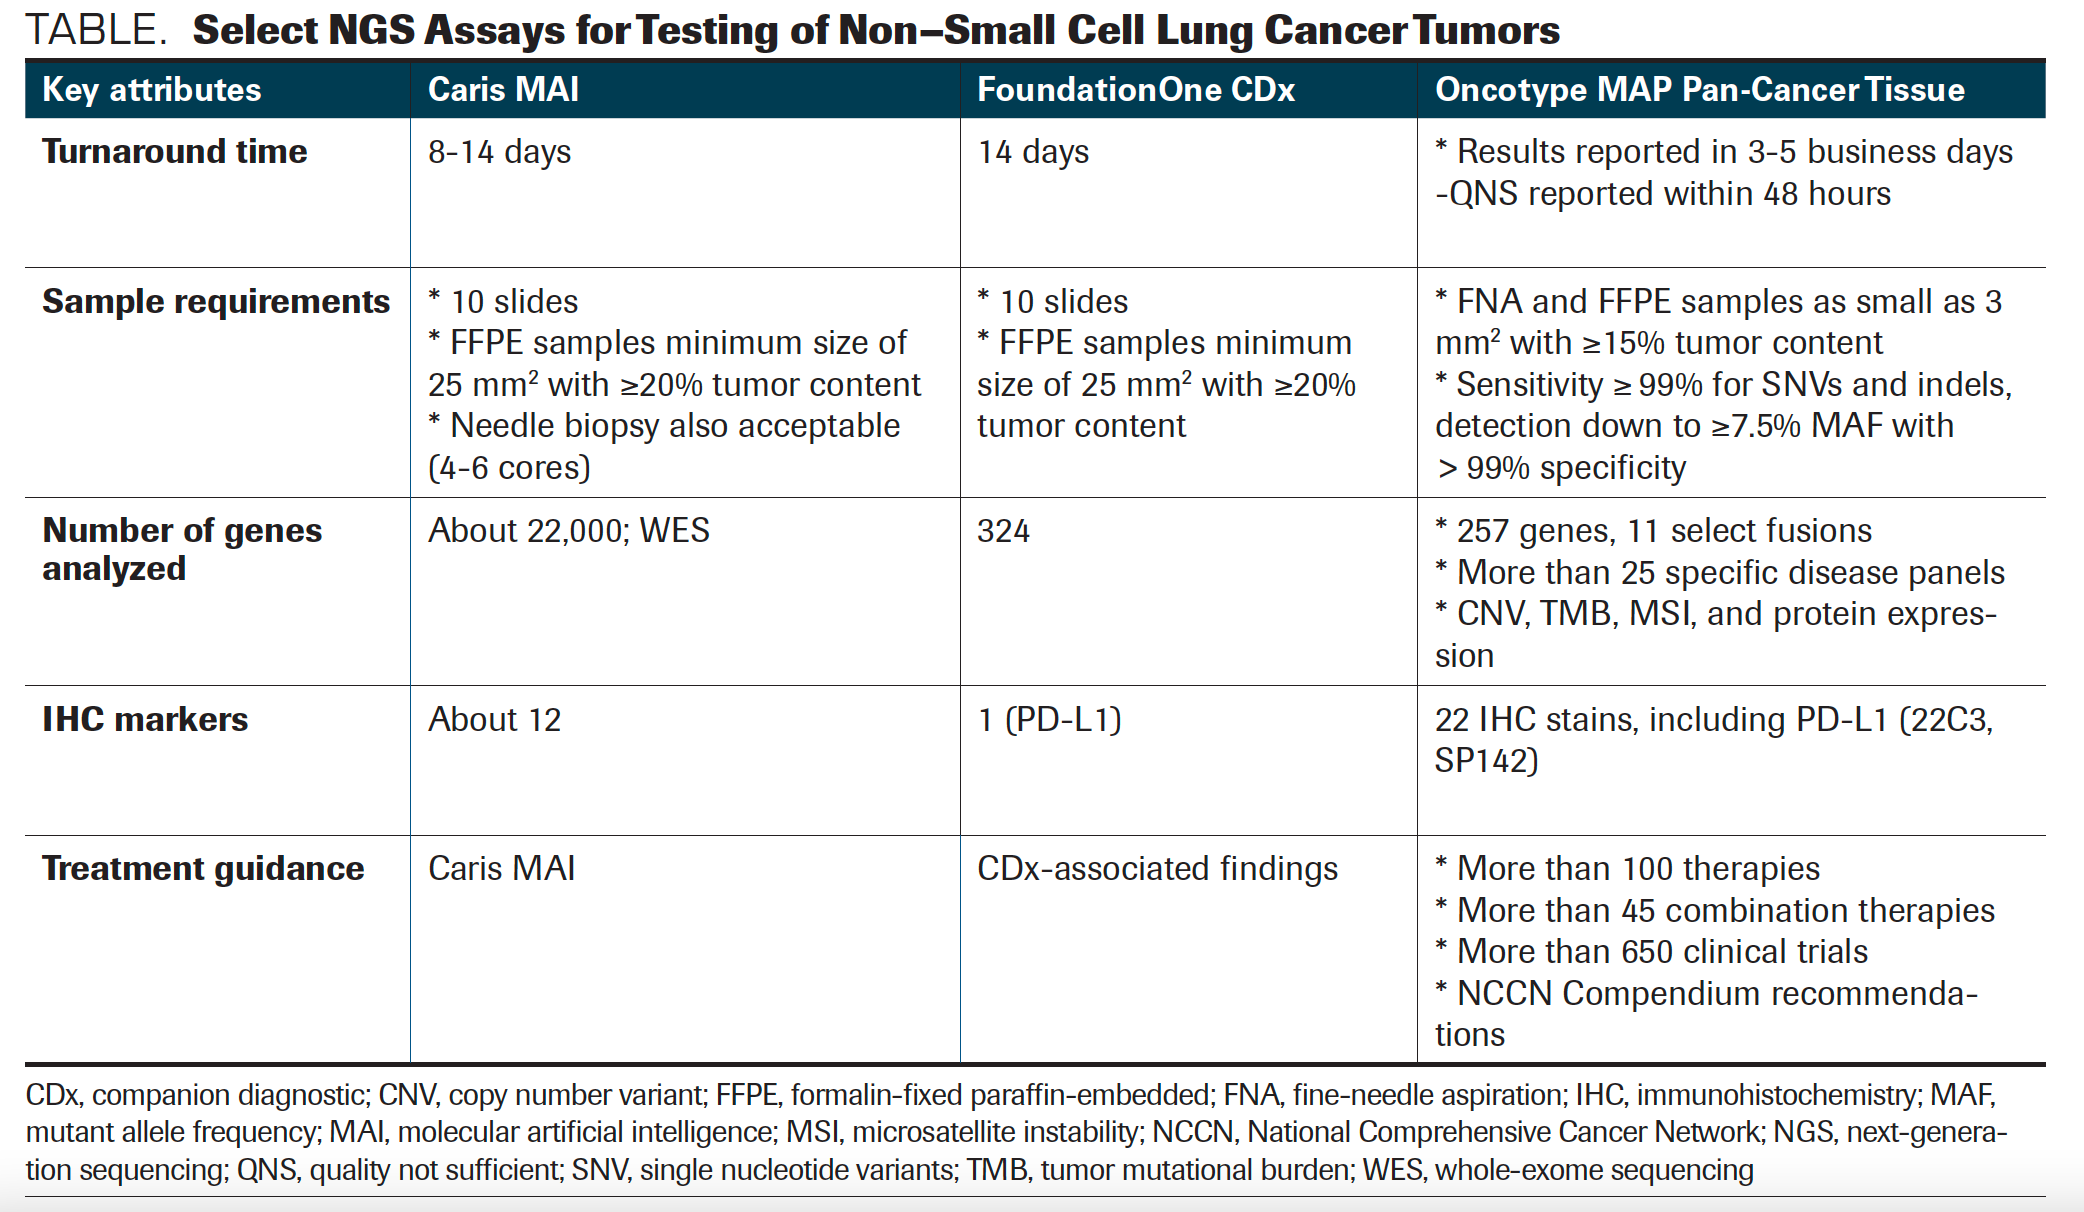 TABLE. Select NGS Assays for Testing of Non–Small Cell Lung Cancer Tumors